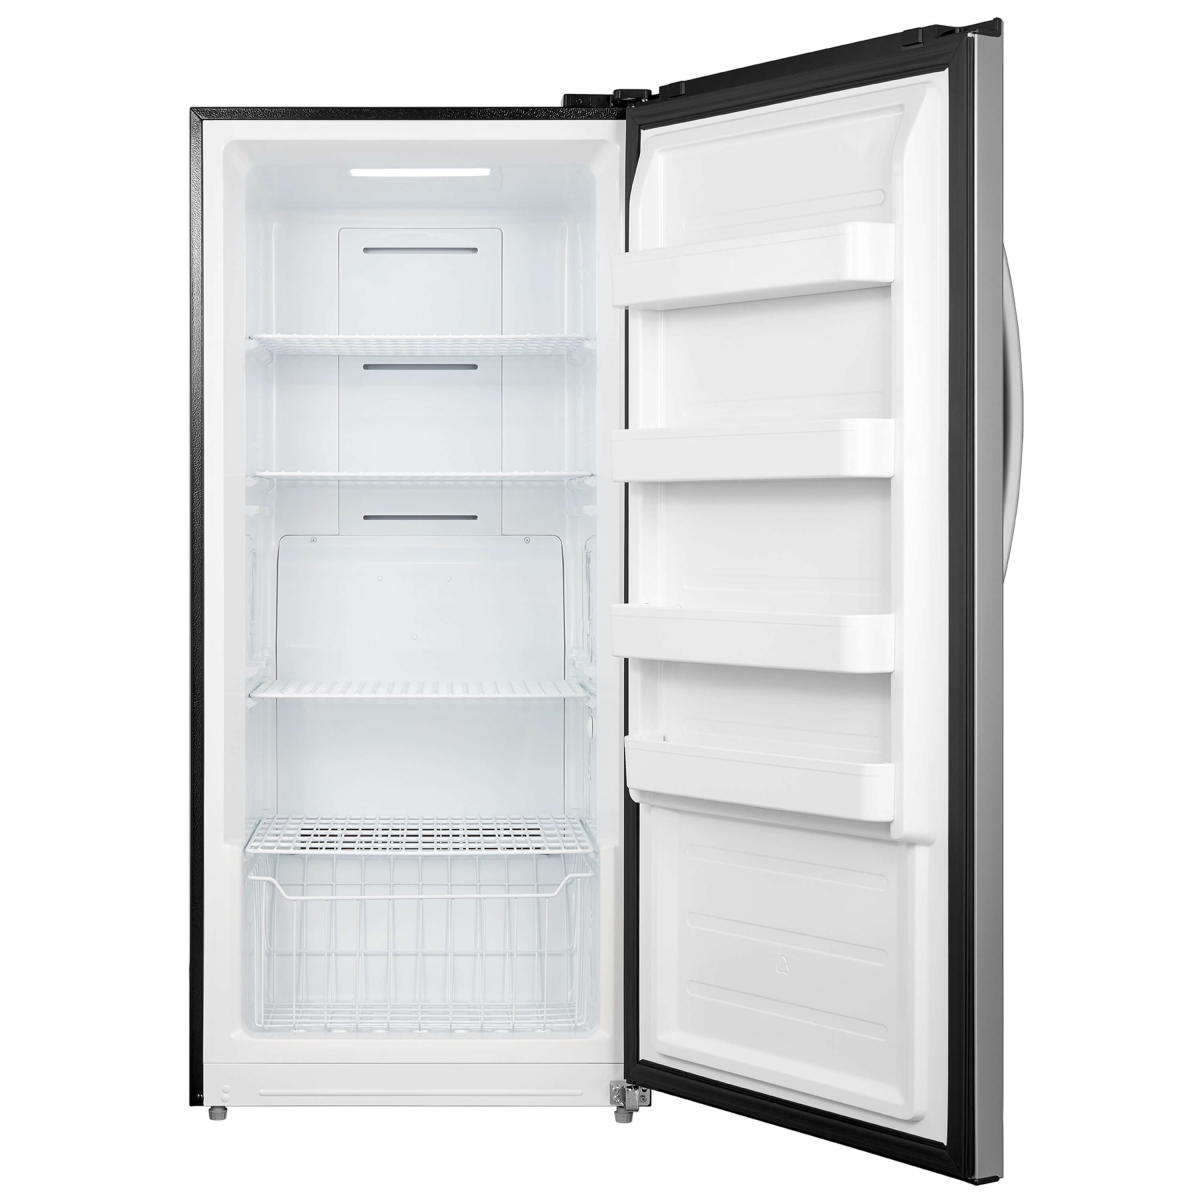 Whynter Udf-139ss 13.8 Cu. Ft. Energy Star Digital Upright Convertible Deep Freezer & Refrigerator, Stainless Steel